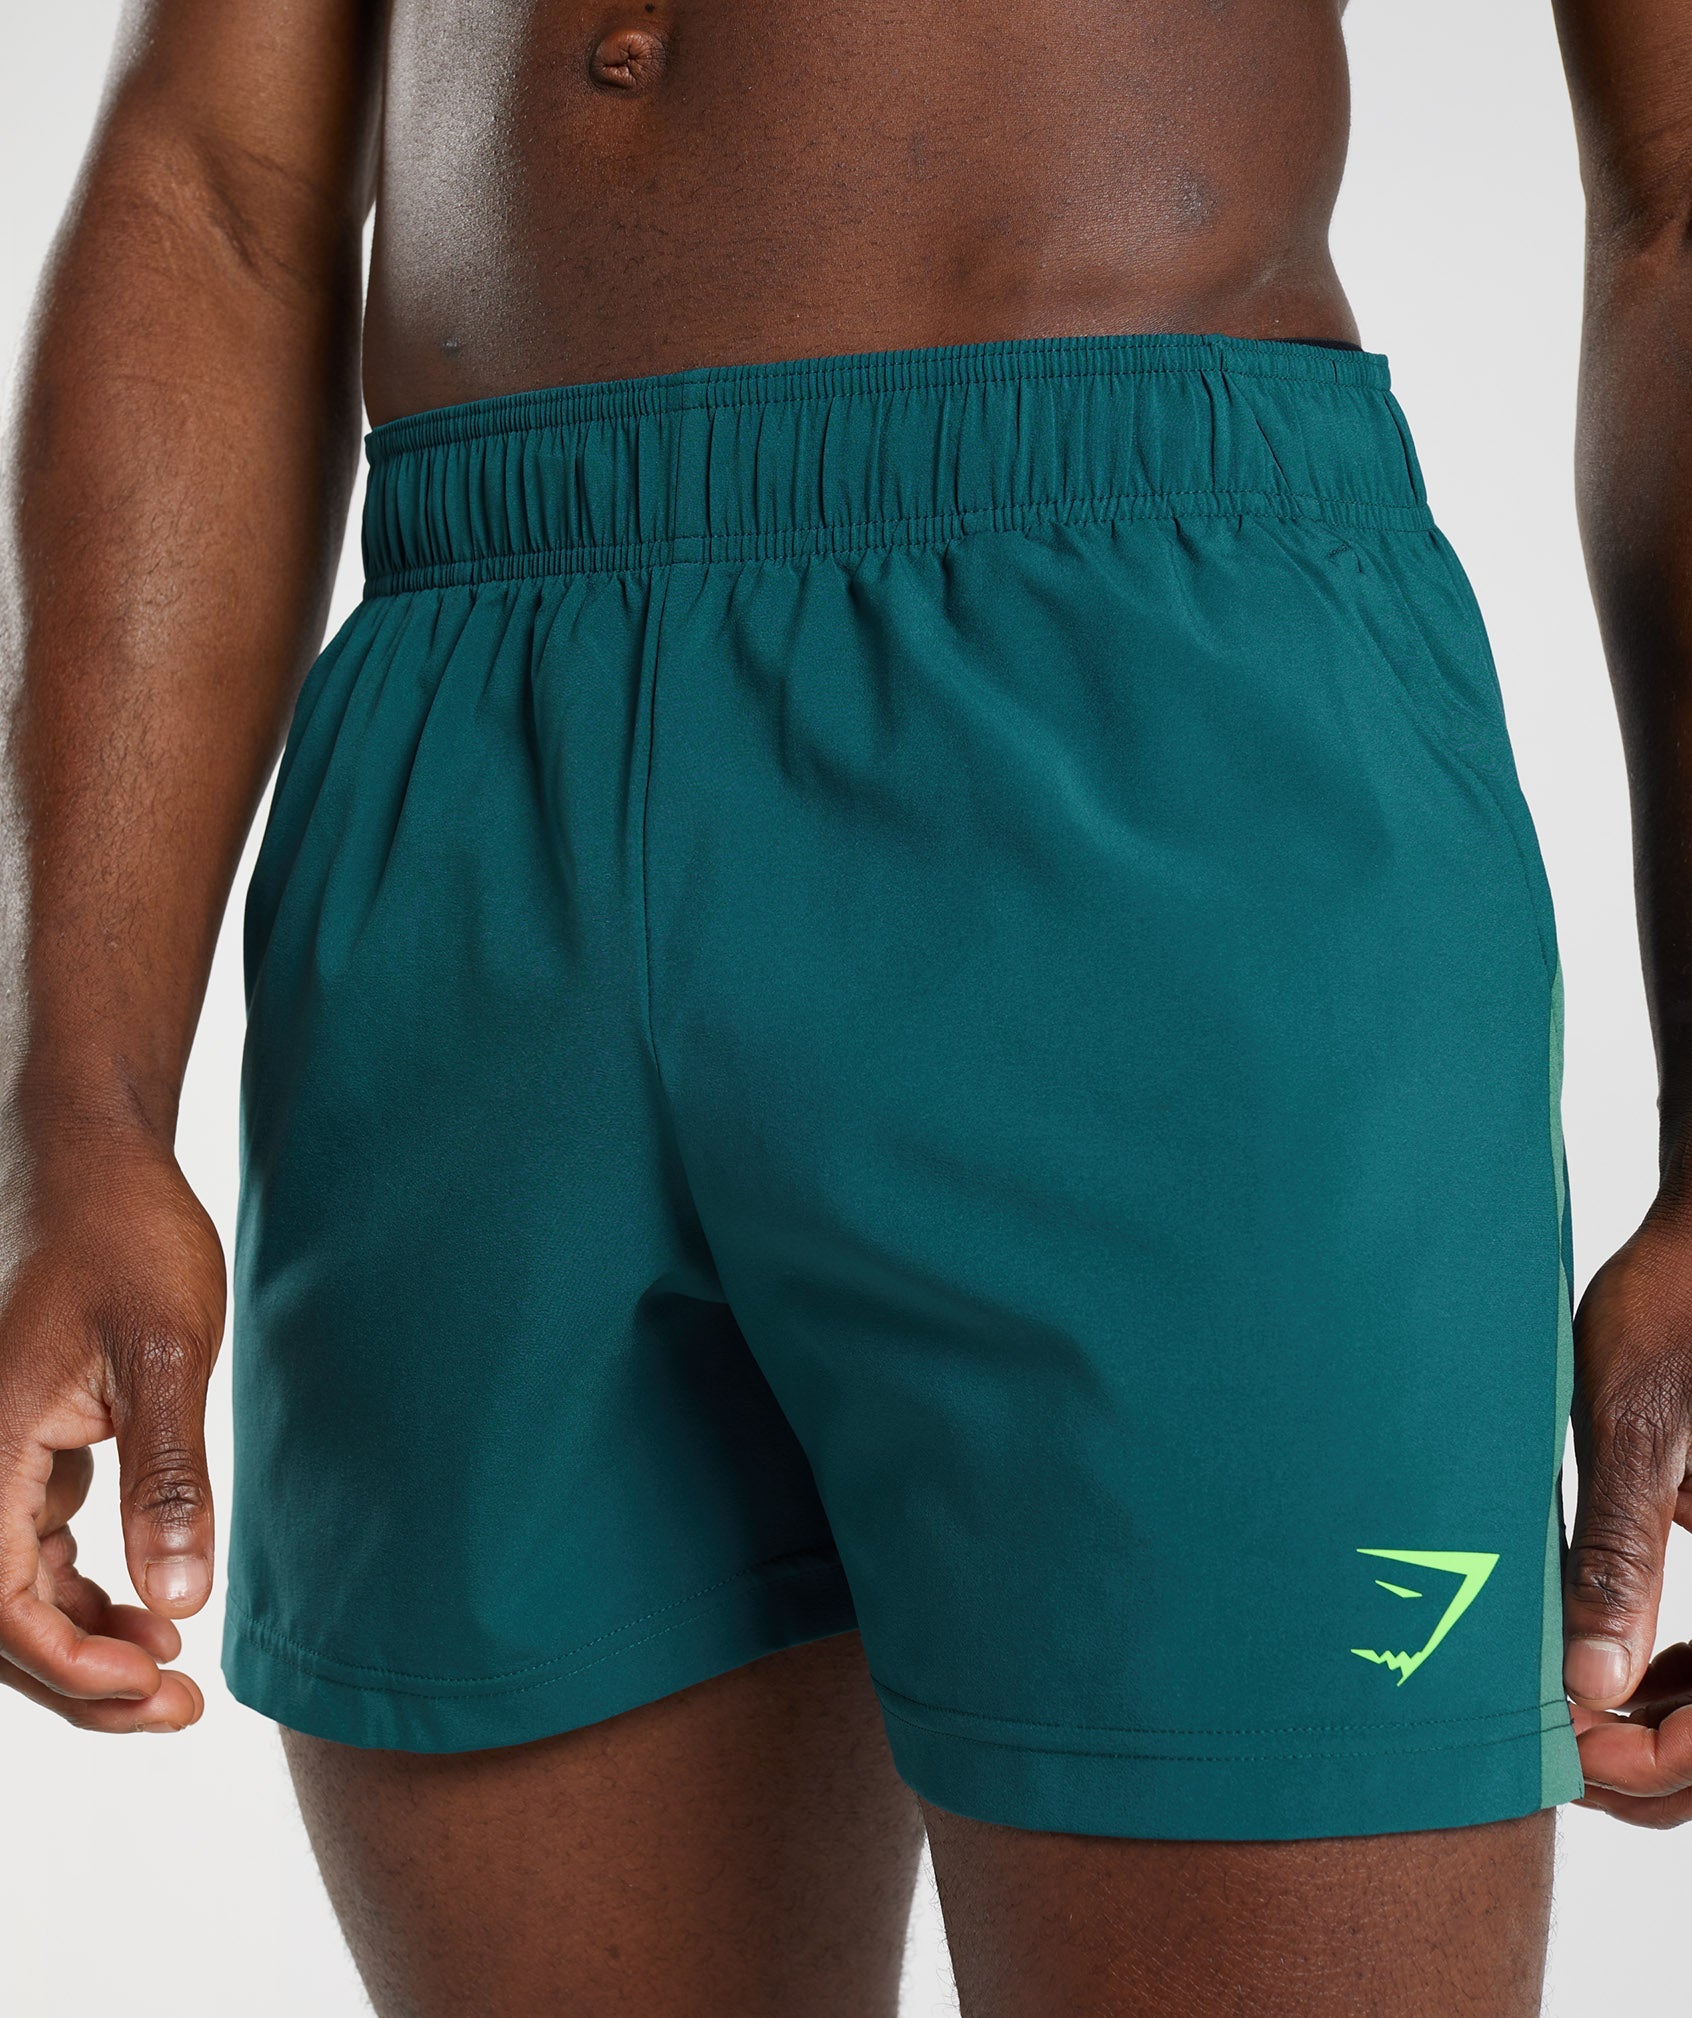 Sport 5" Shorts in Winter Teal/Slate Blue - view 5